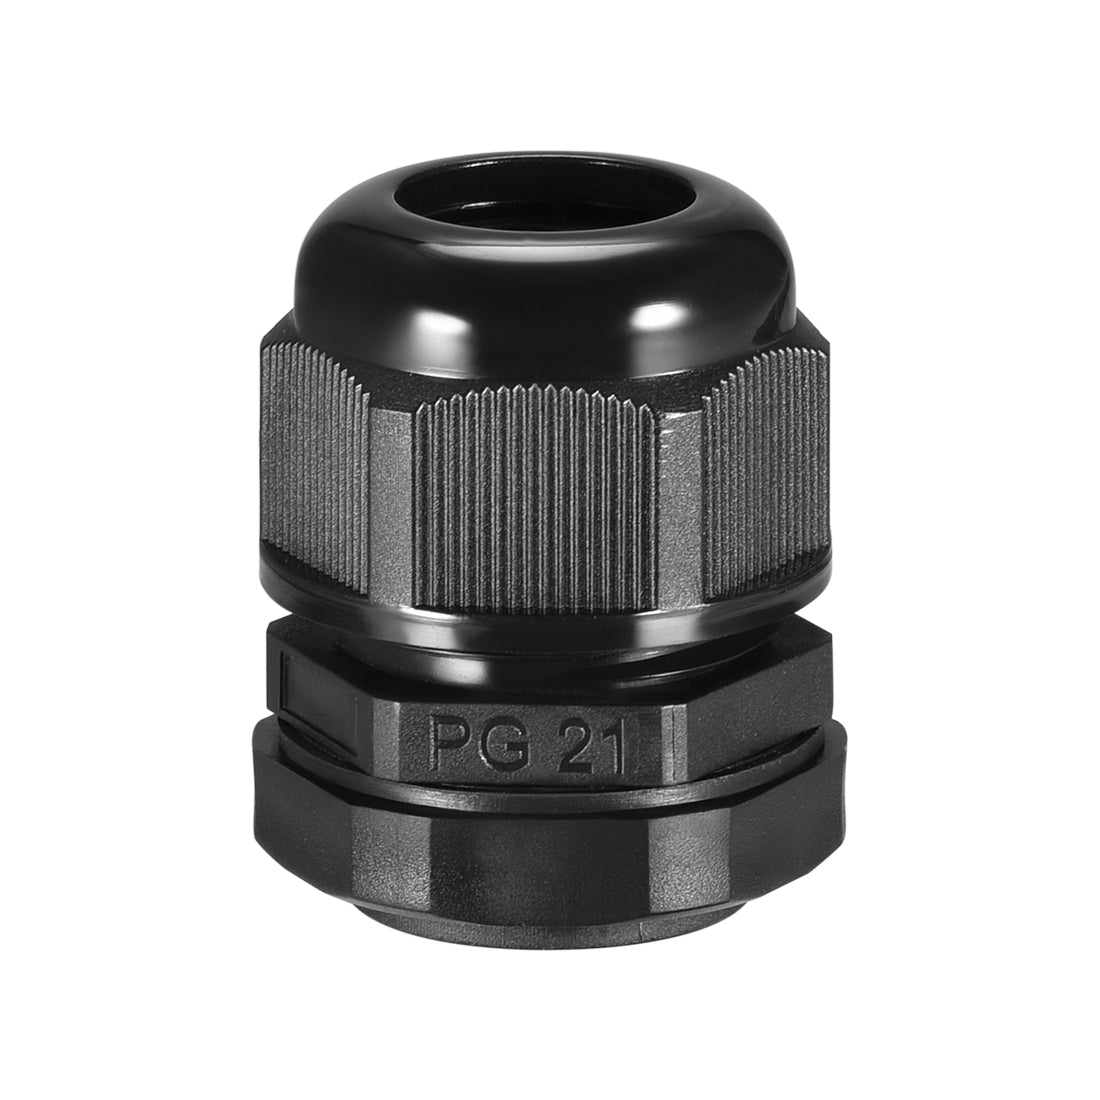 uxcell Uxcell PG21 Cable Gland 3 Holes Waterproof IP68 Nylon Joint Adjustable Locknut for 3.5-5.2mm Dia Wire